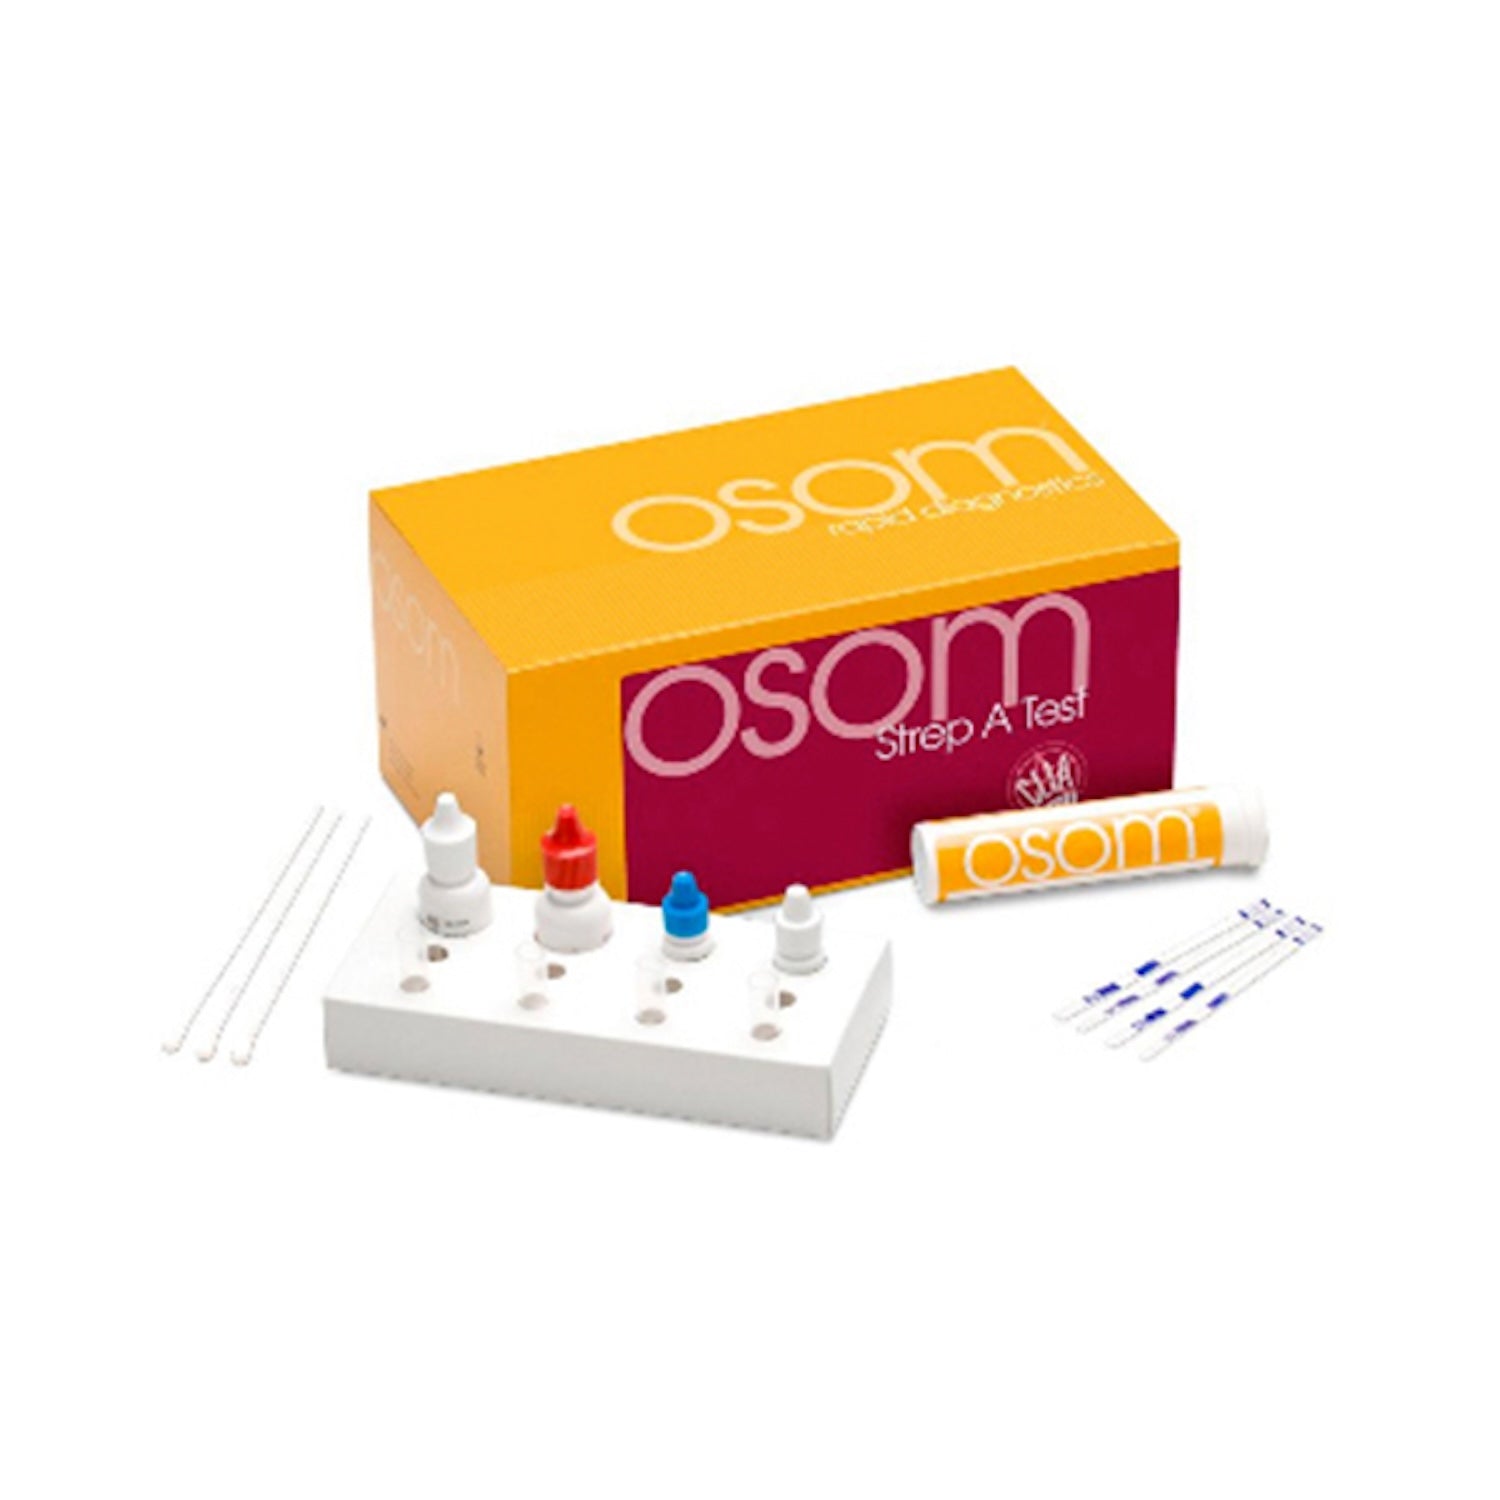 OSOM Strep A Test | Pack of 20 Tests